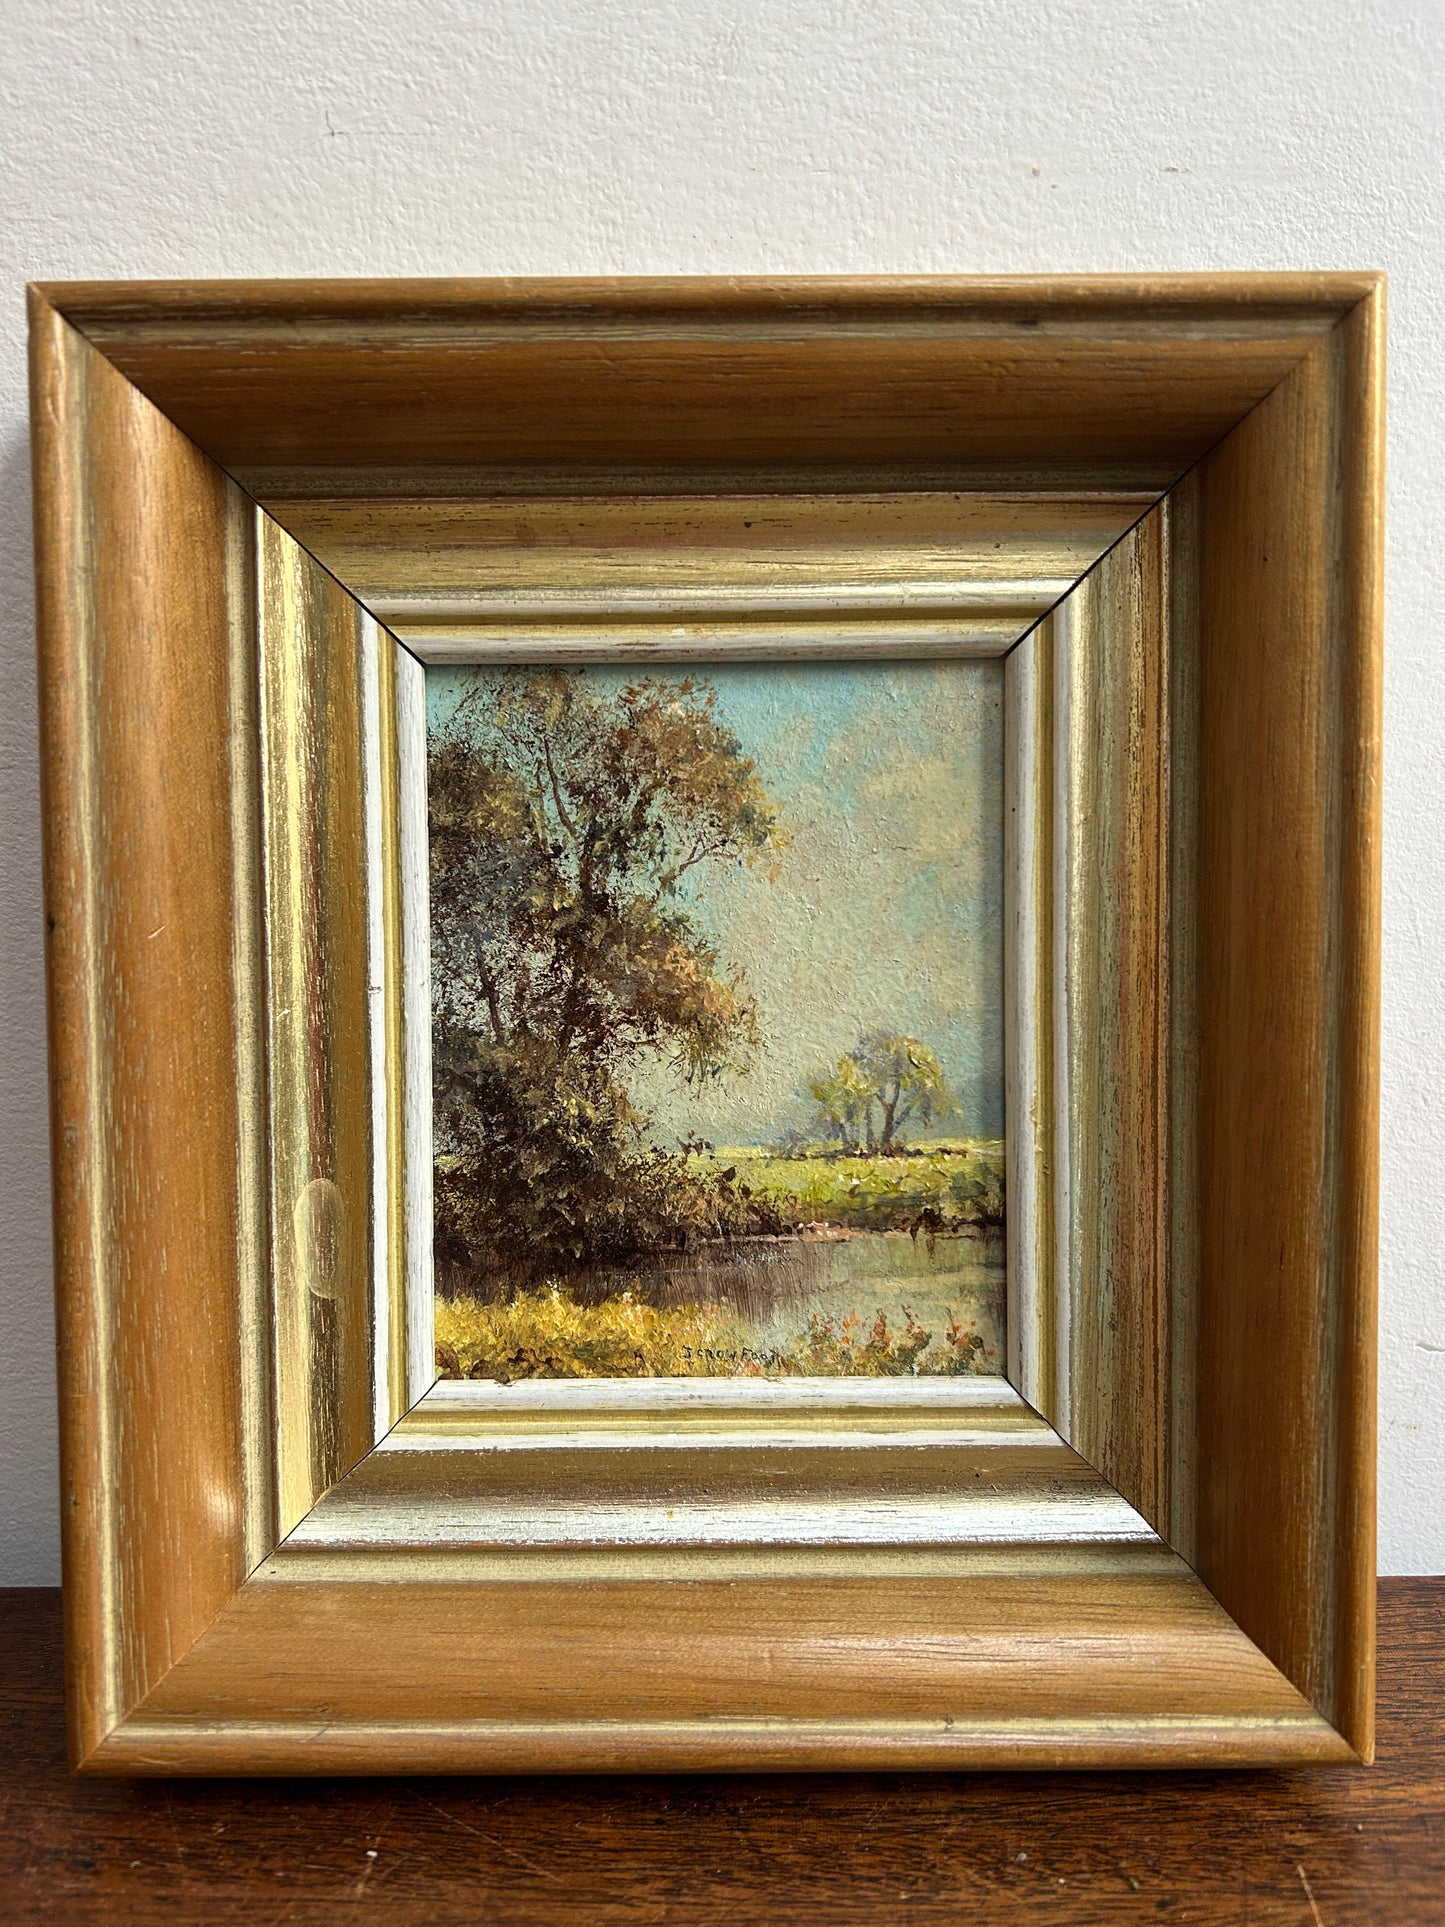 A stunning little oil  by Suffolk artist Joe Crowfoot  Titles River “Waverney” at Ellington housed in a high quality gilt frame.